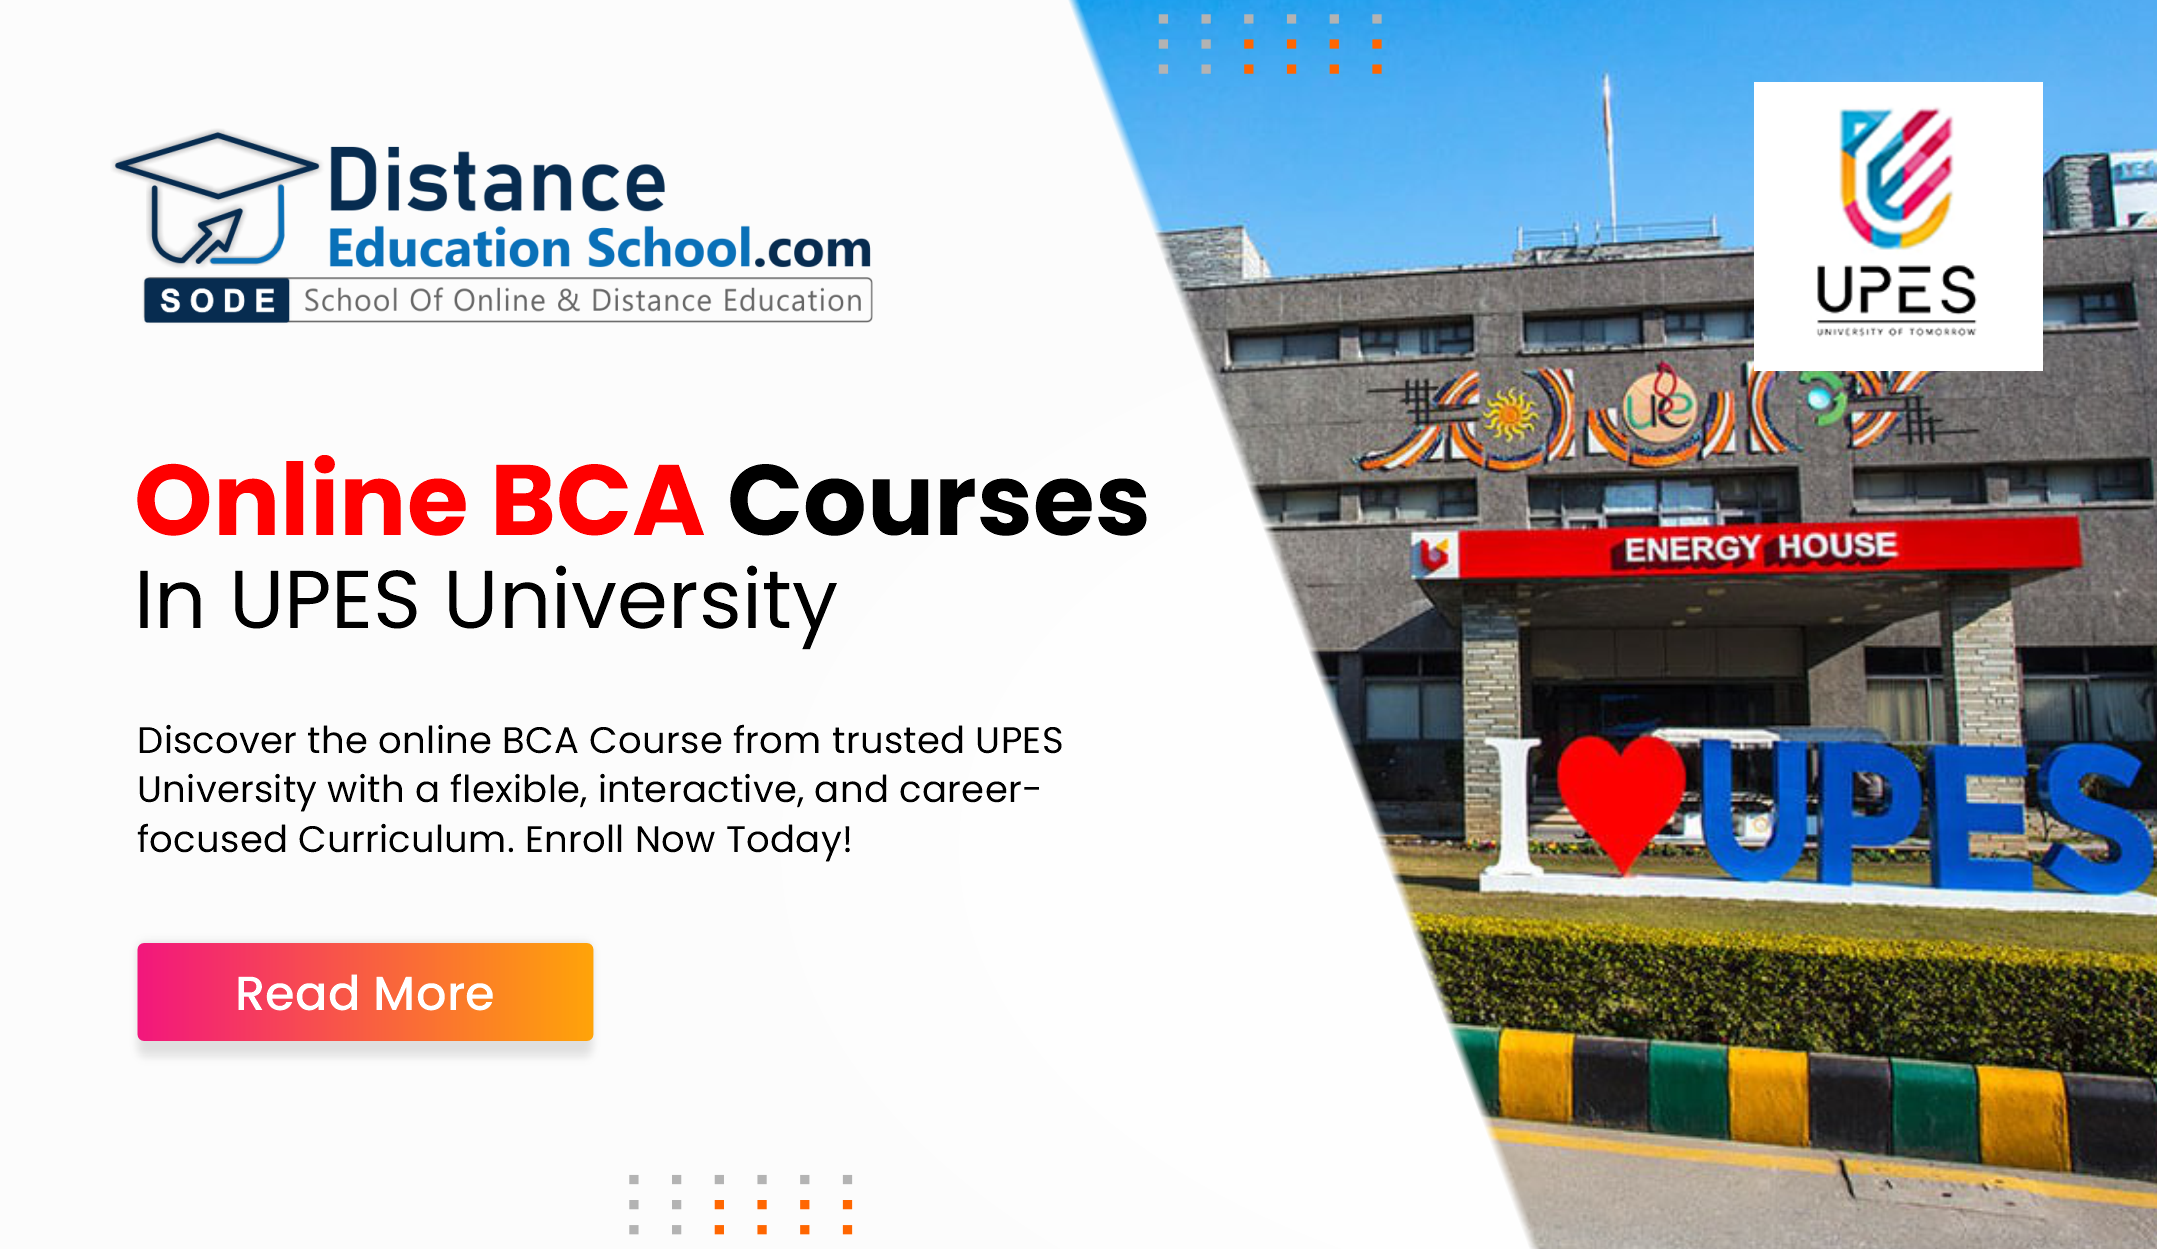 Online BCA Course from UPES University